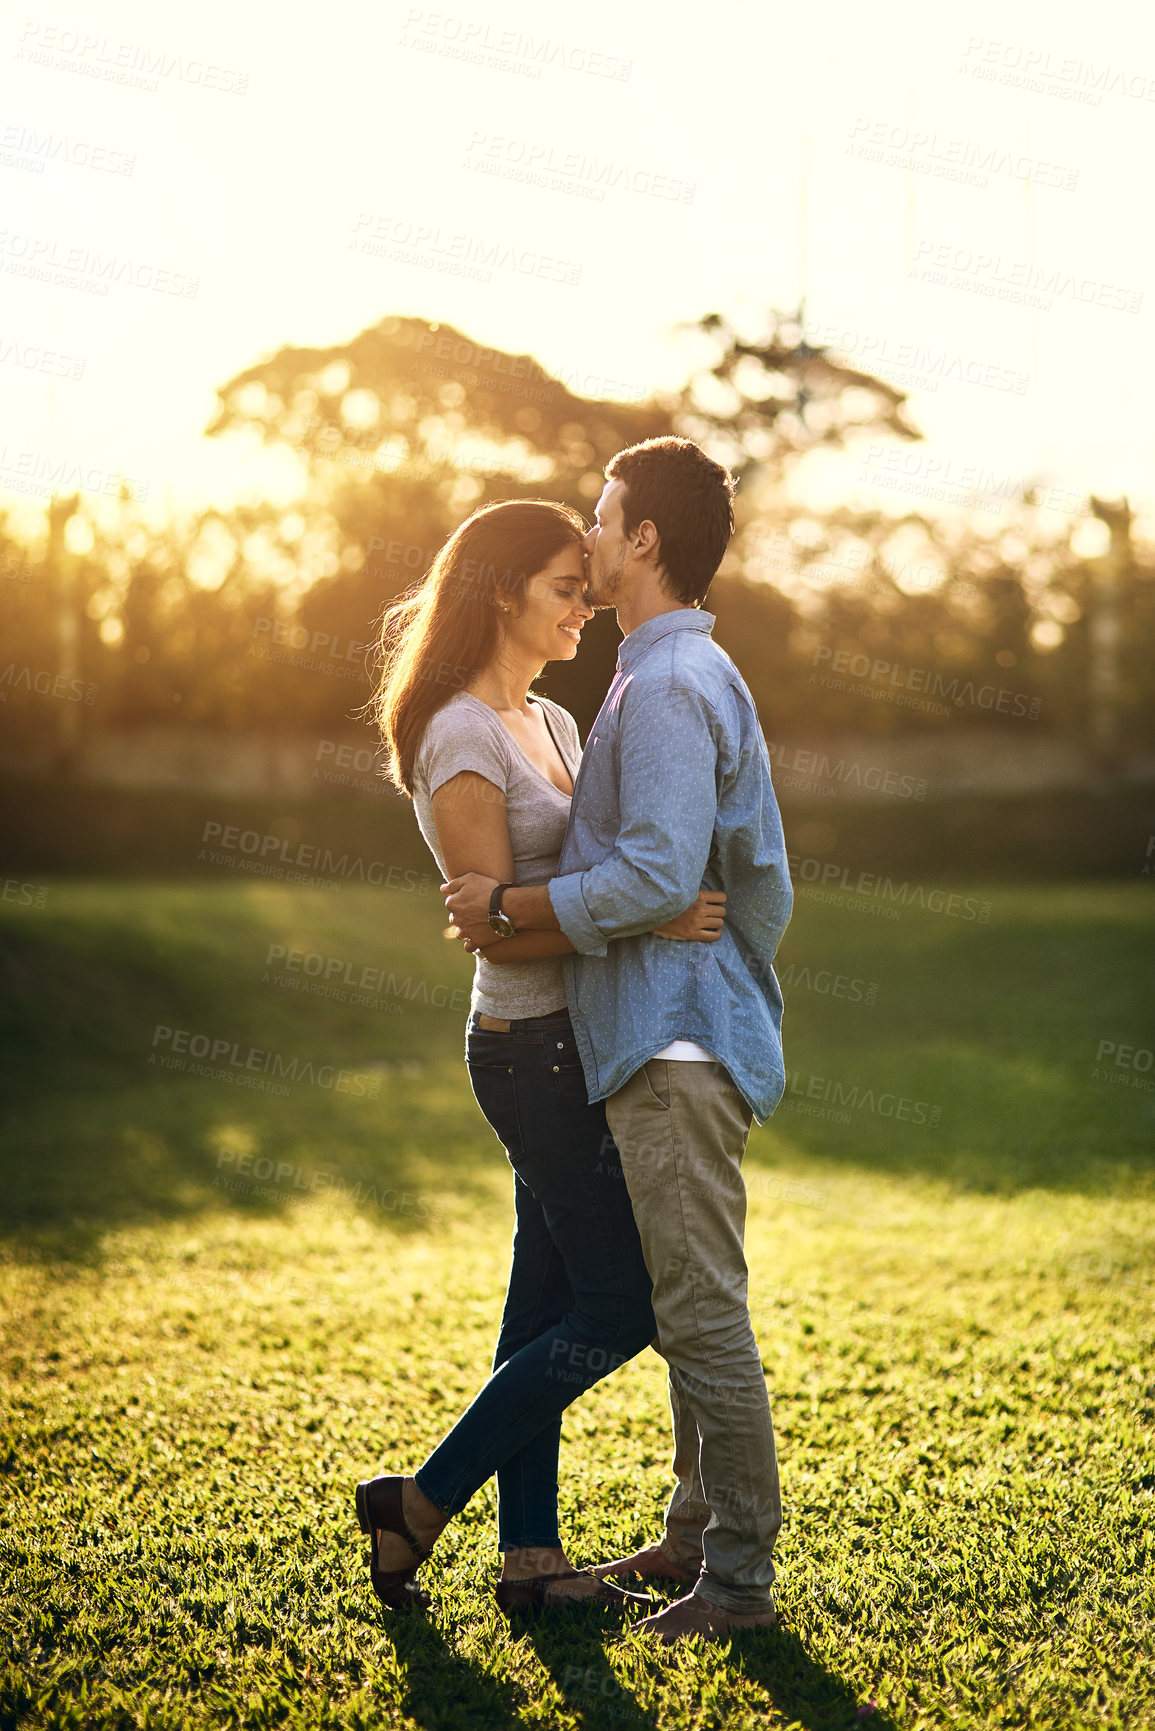 Buy stock photo Shot of an affectionate young couple bonding together outdoors